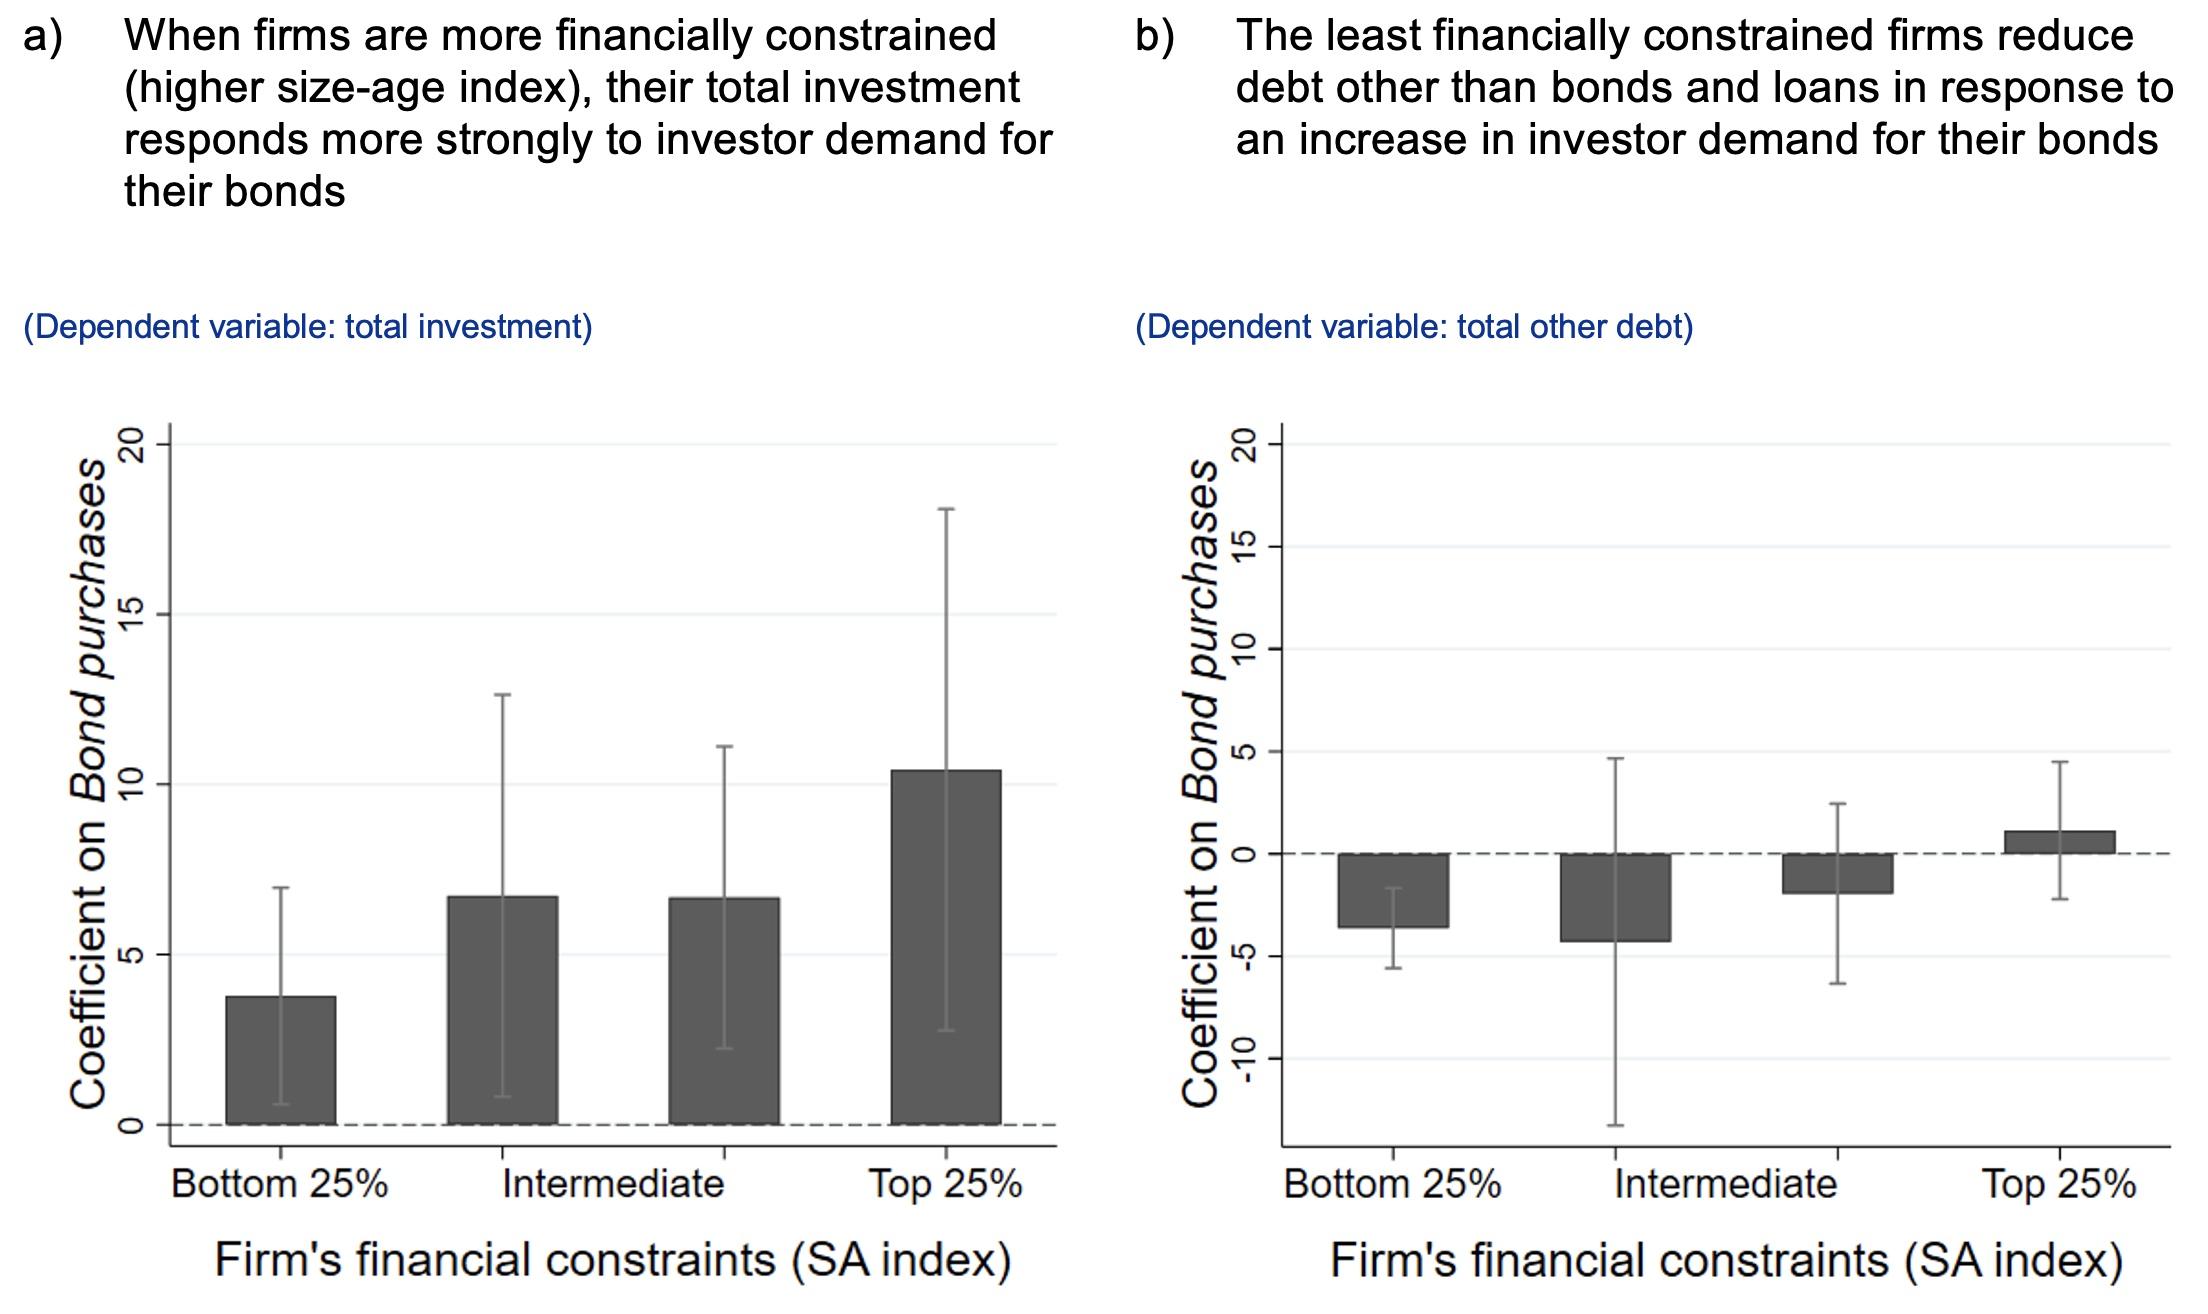 Figure 3 Firms respond differently depending on their financial constraints